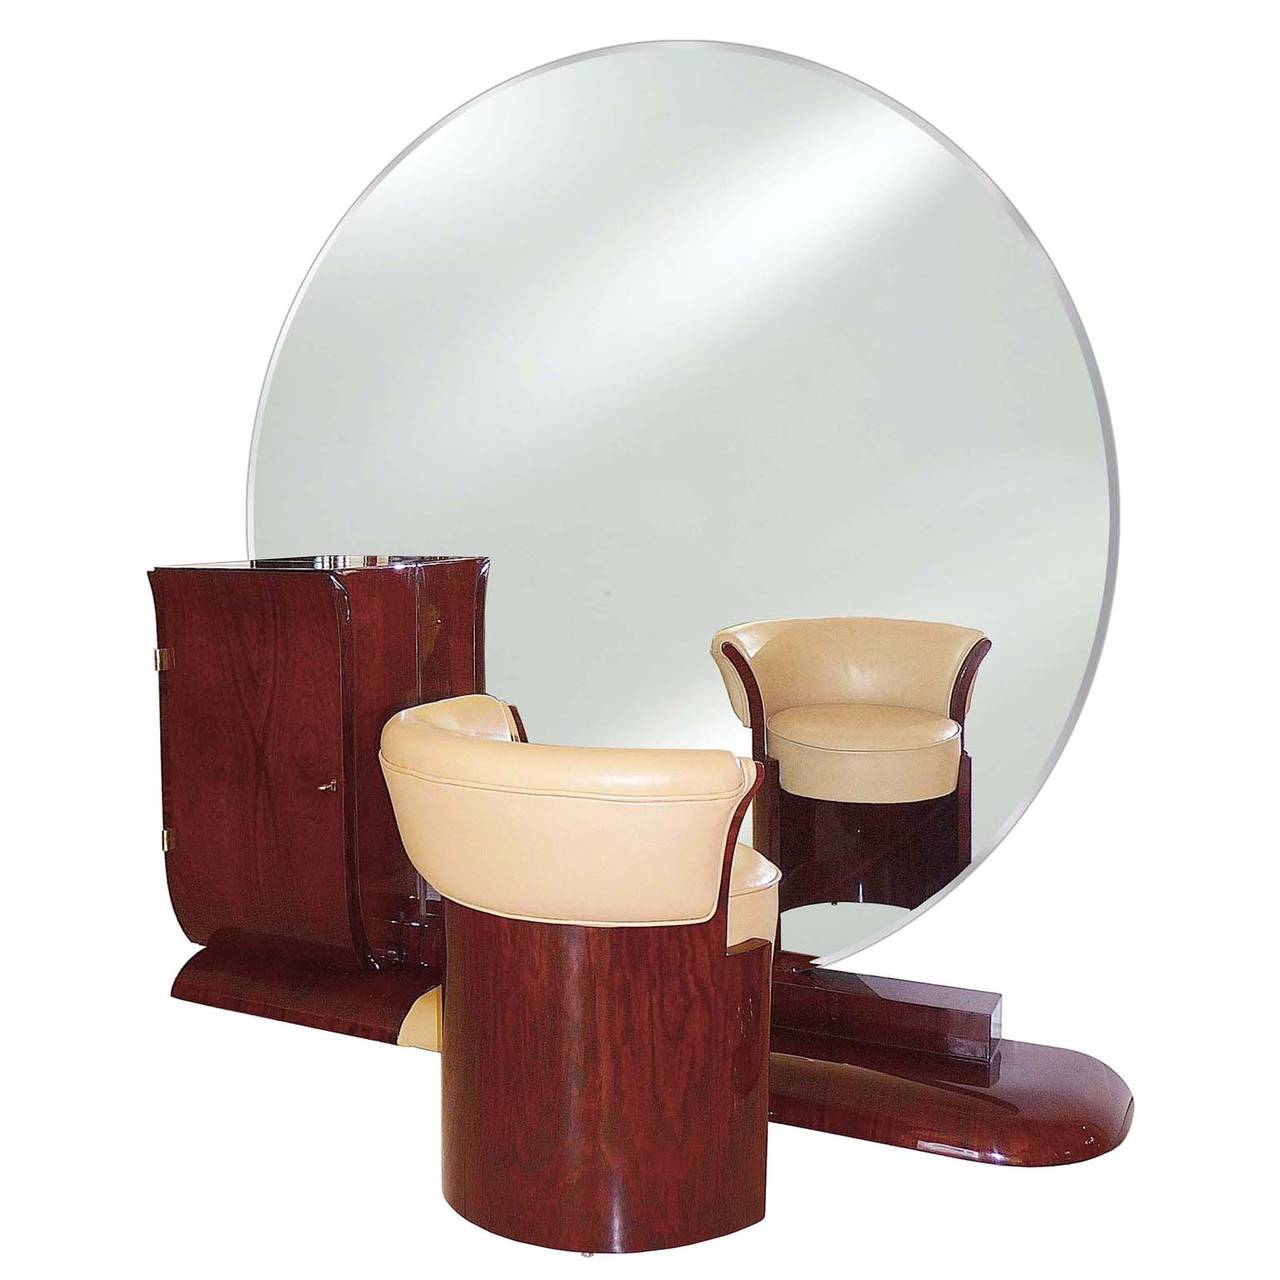 Exquisite, unique coifeuse with round mirror and barrel back tabouret, palisander veneer, interior in mahogany. Restored in high gloss lacquer finish. 